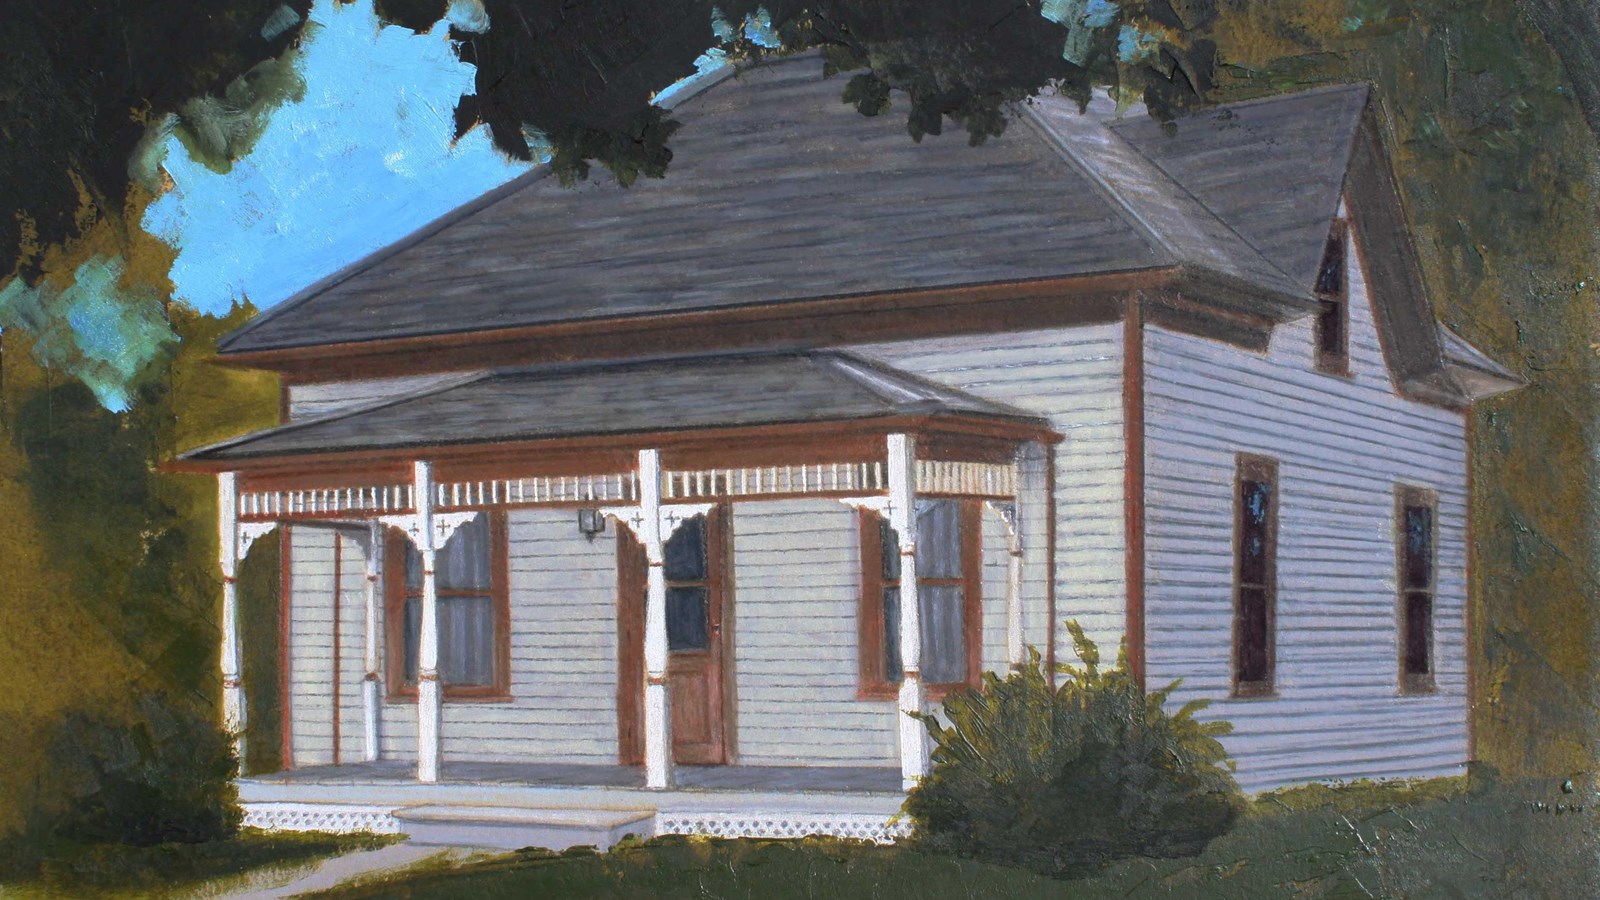 A painting depicts a two-story cream colored house with brown trim.